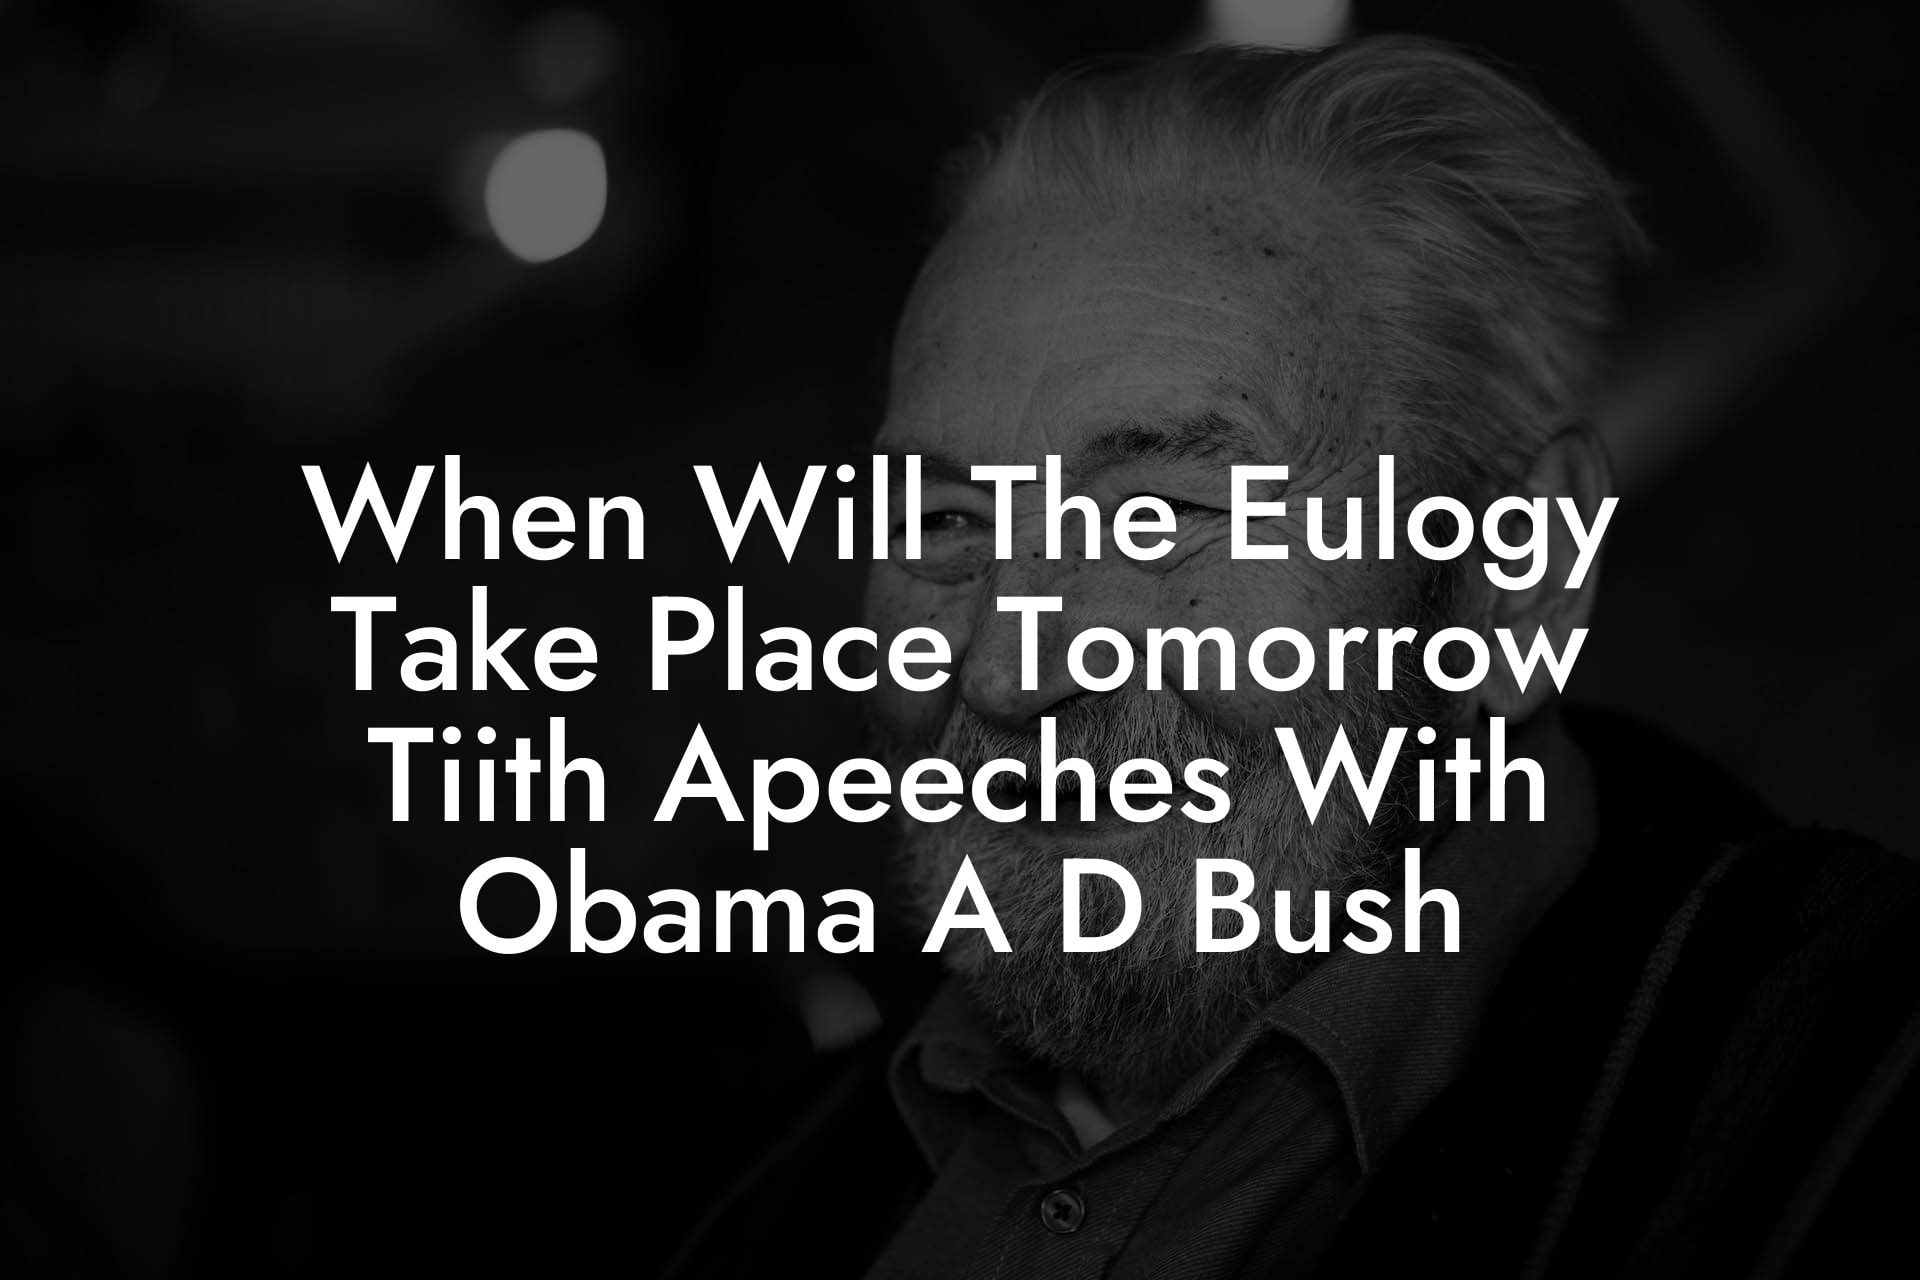 When Will The Eulogy Take Place Tomorrow Tiith Apeeches With Obama A D Bush